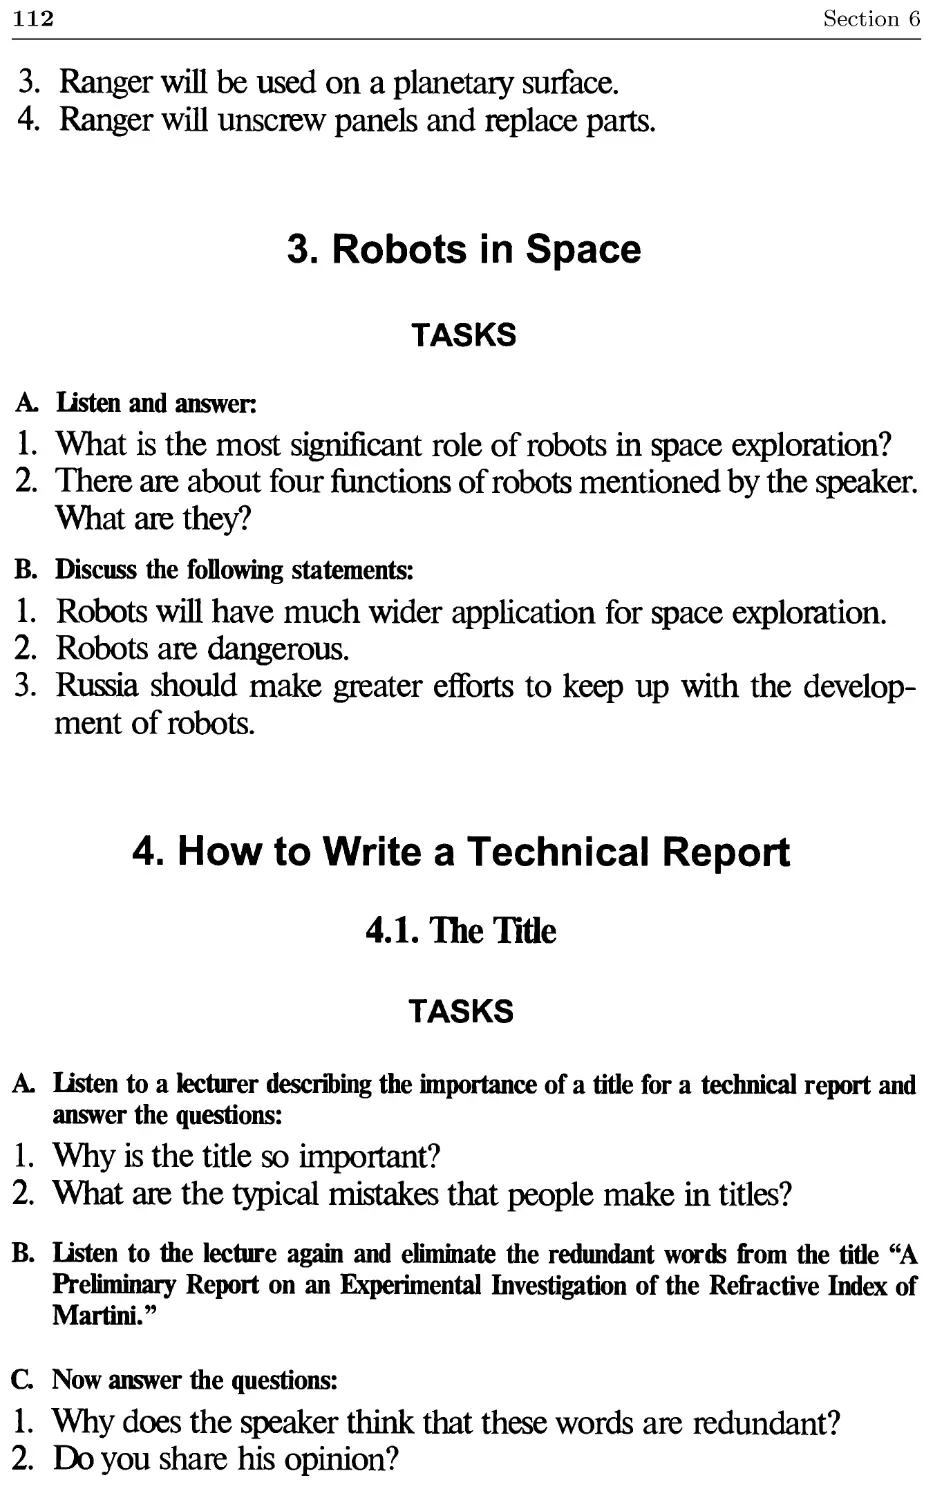 Listening 3. Robots in Space
Listening 4. How to Write a Technical Report